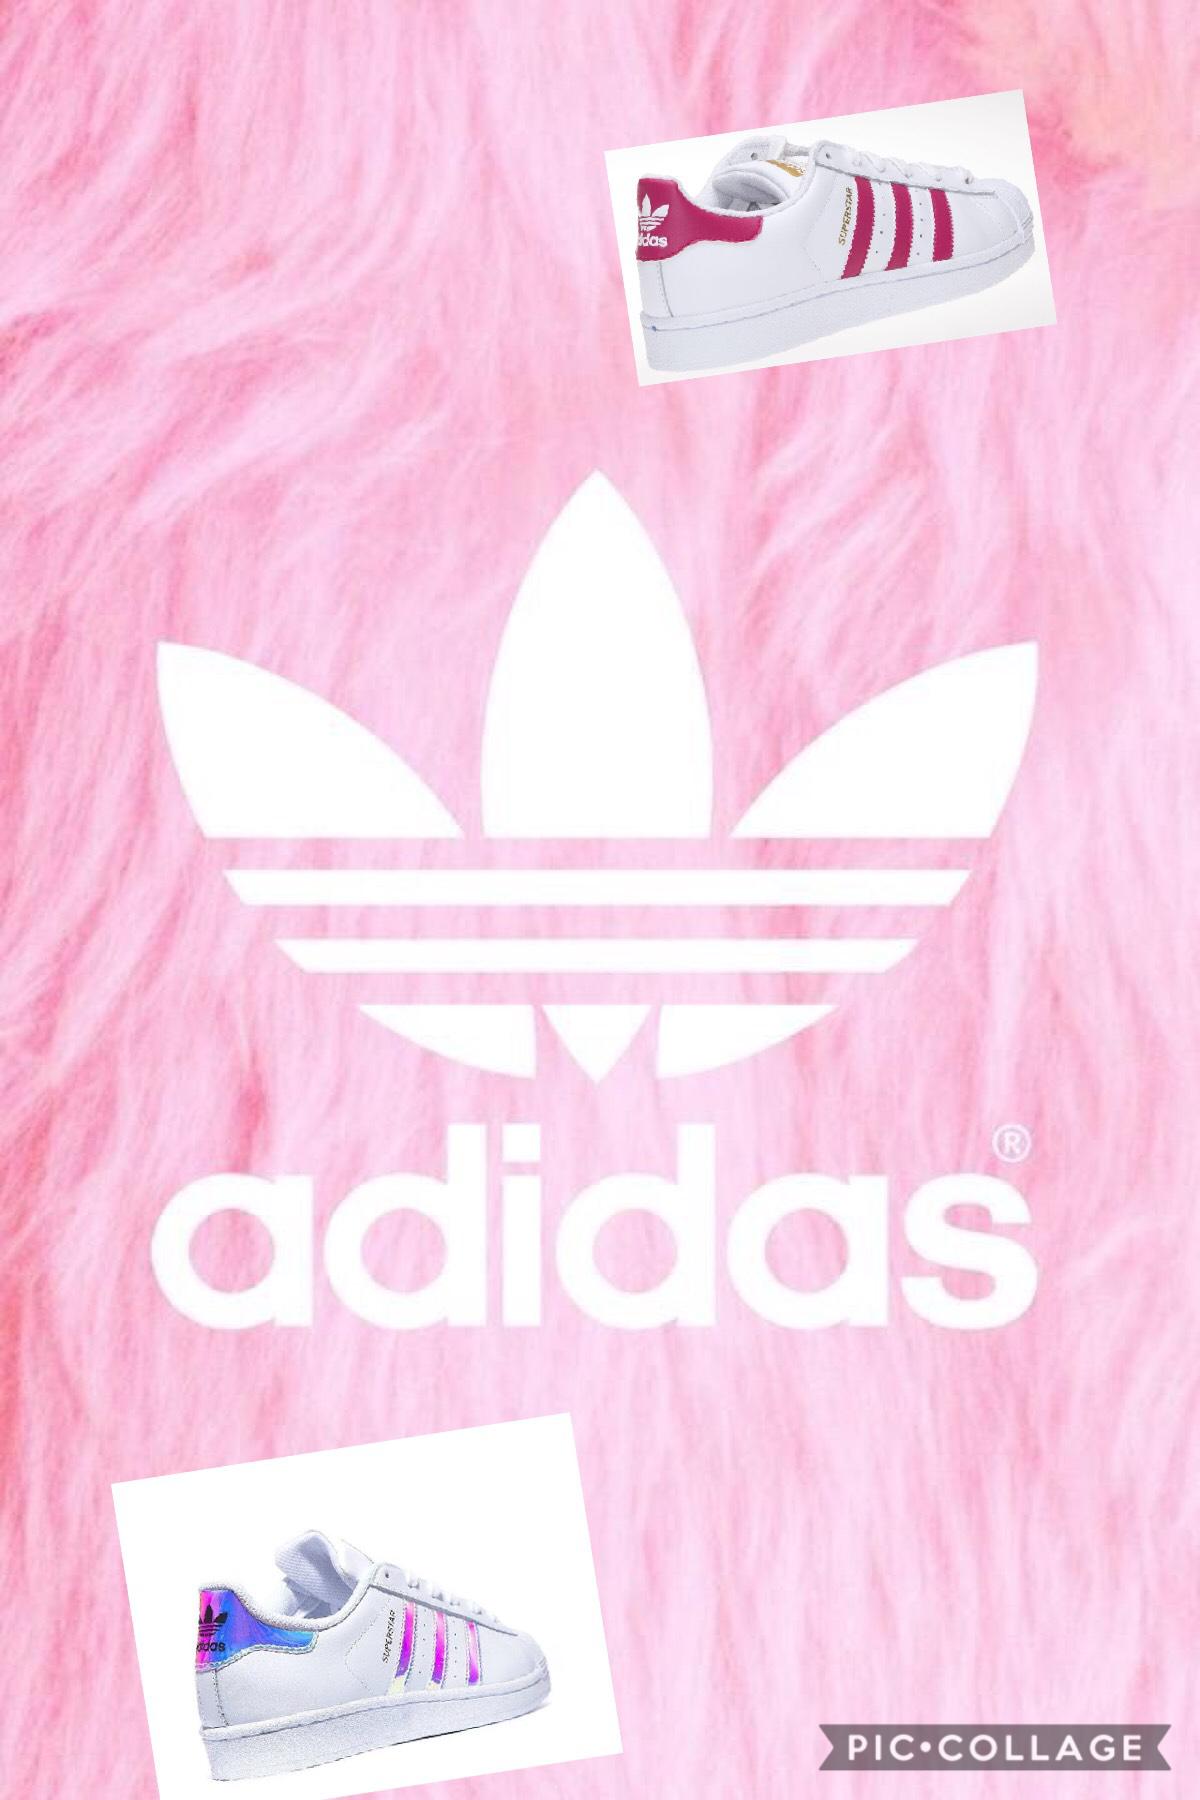 Tap to reveal



Adidas 